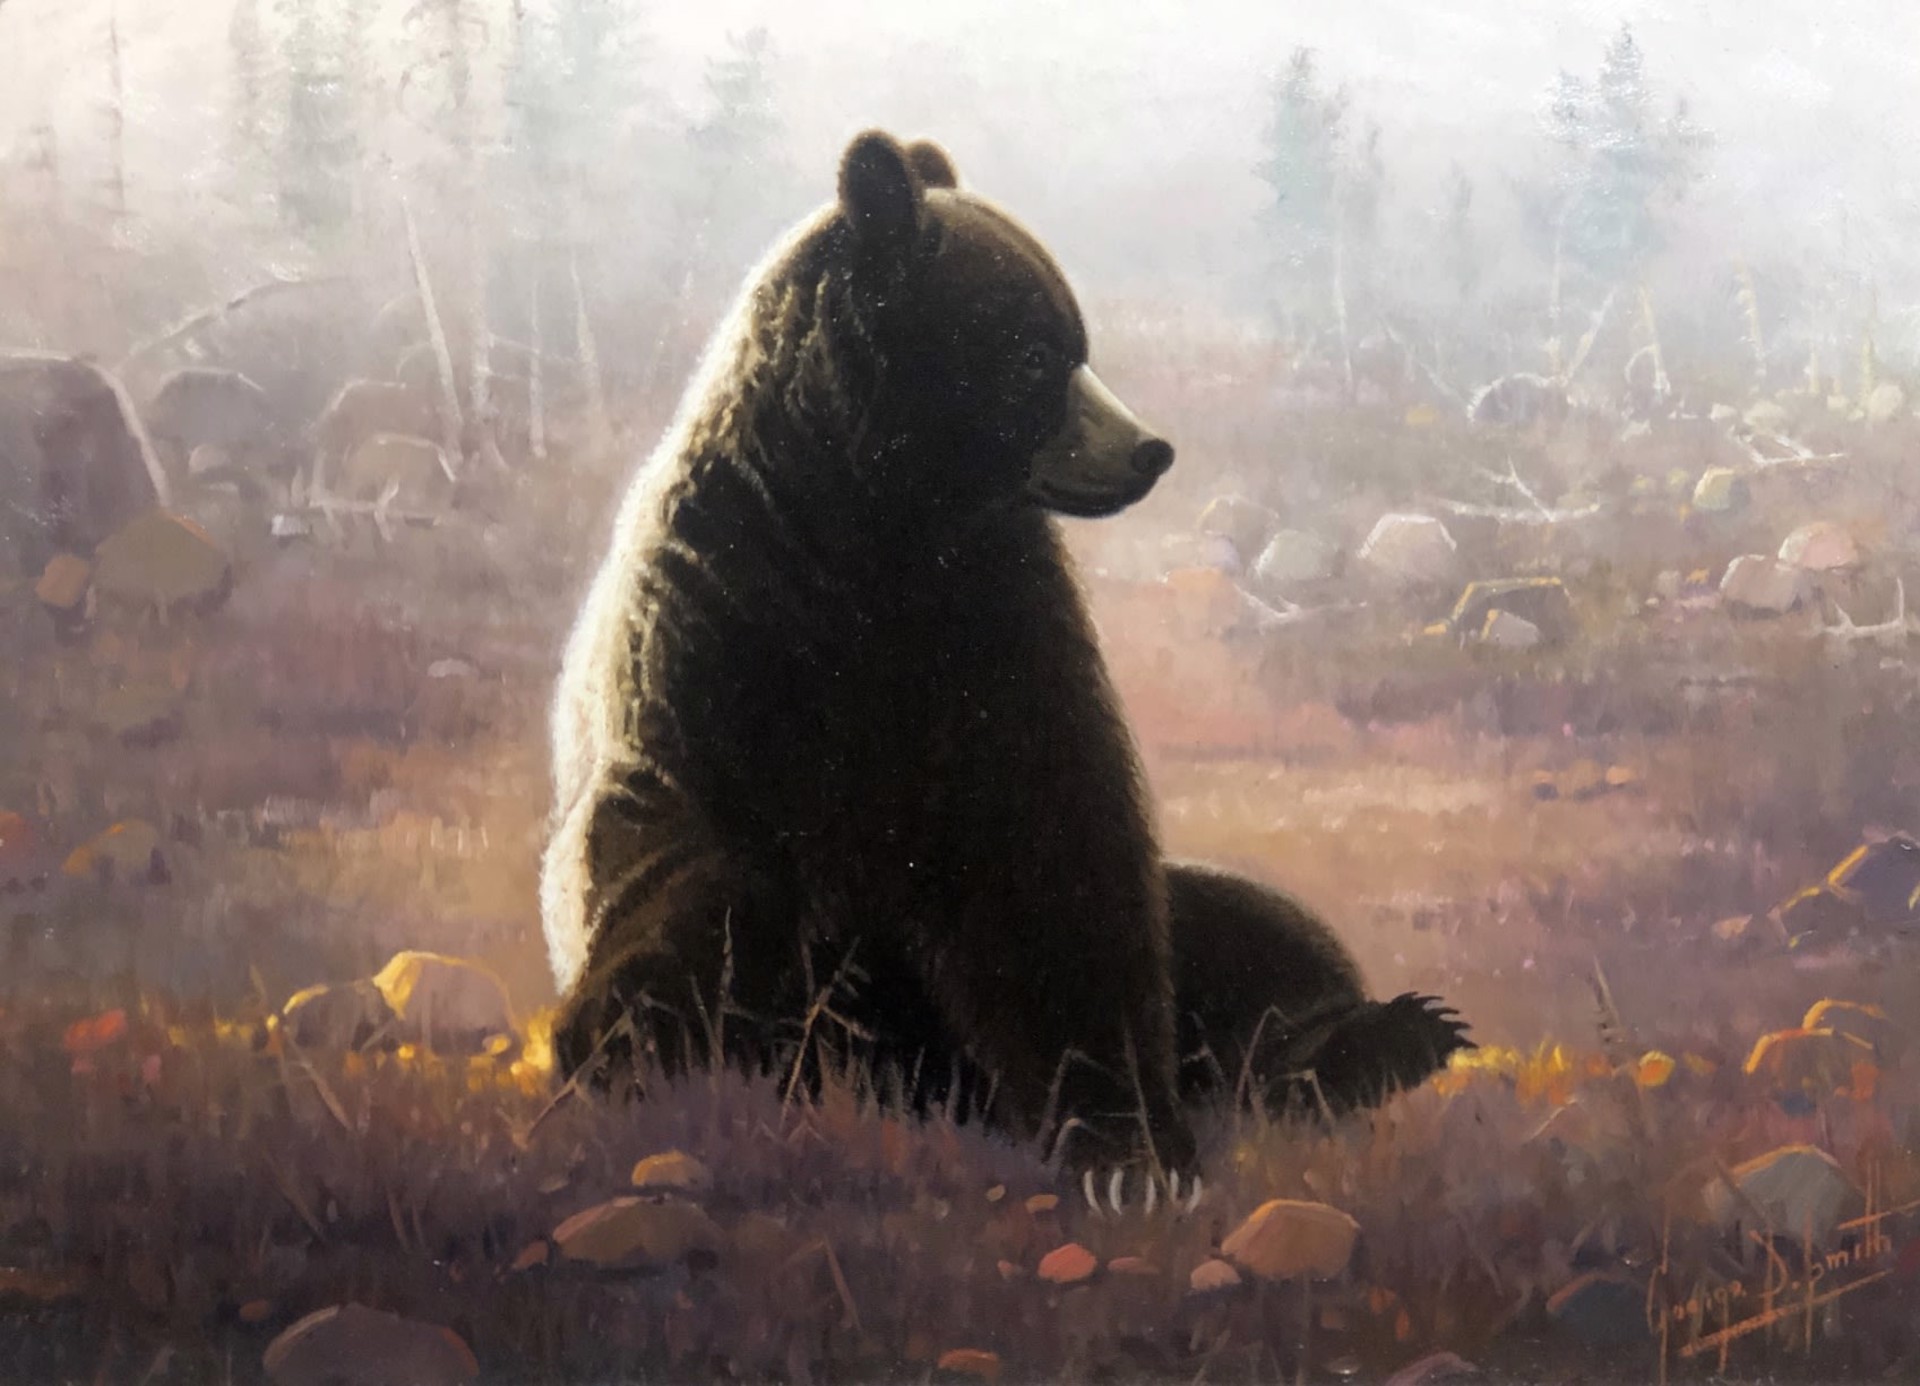 GRIZZLY - EARLY MORNING - CUB CREEK MEADOWS by George "Dee" Smith